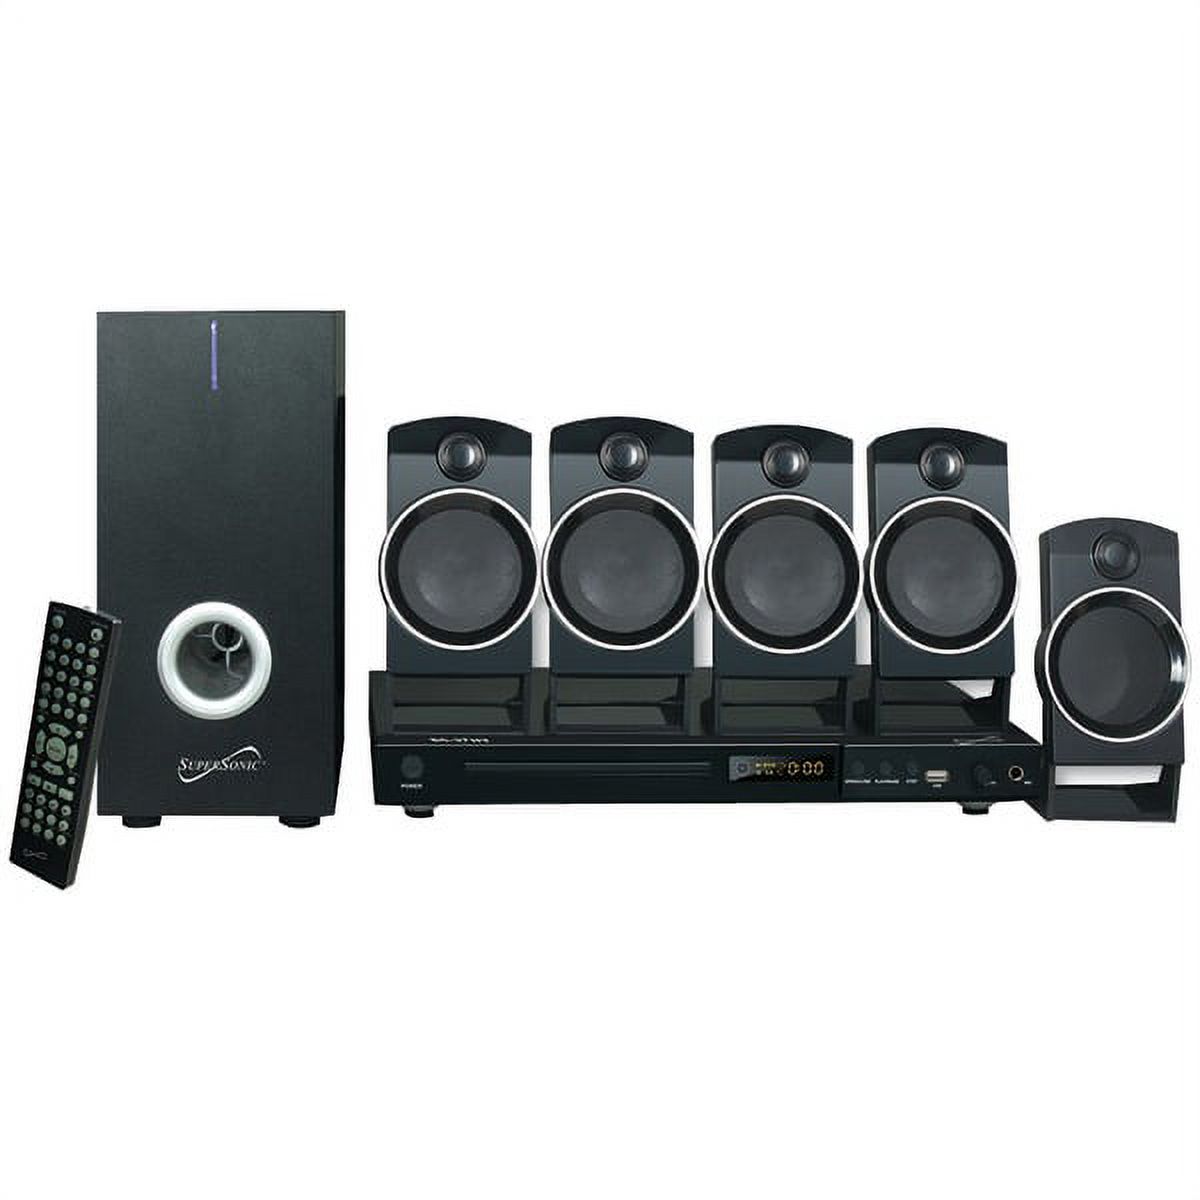 Supersonic 5.1-Channel DVD Home Theater System - image 1 of 1